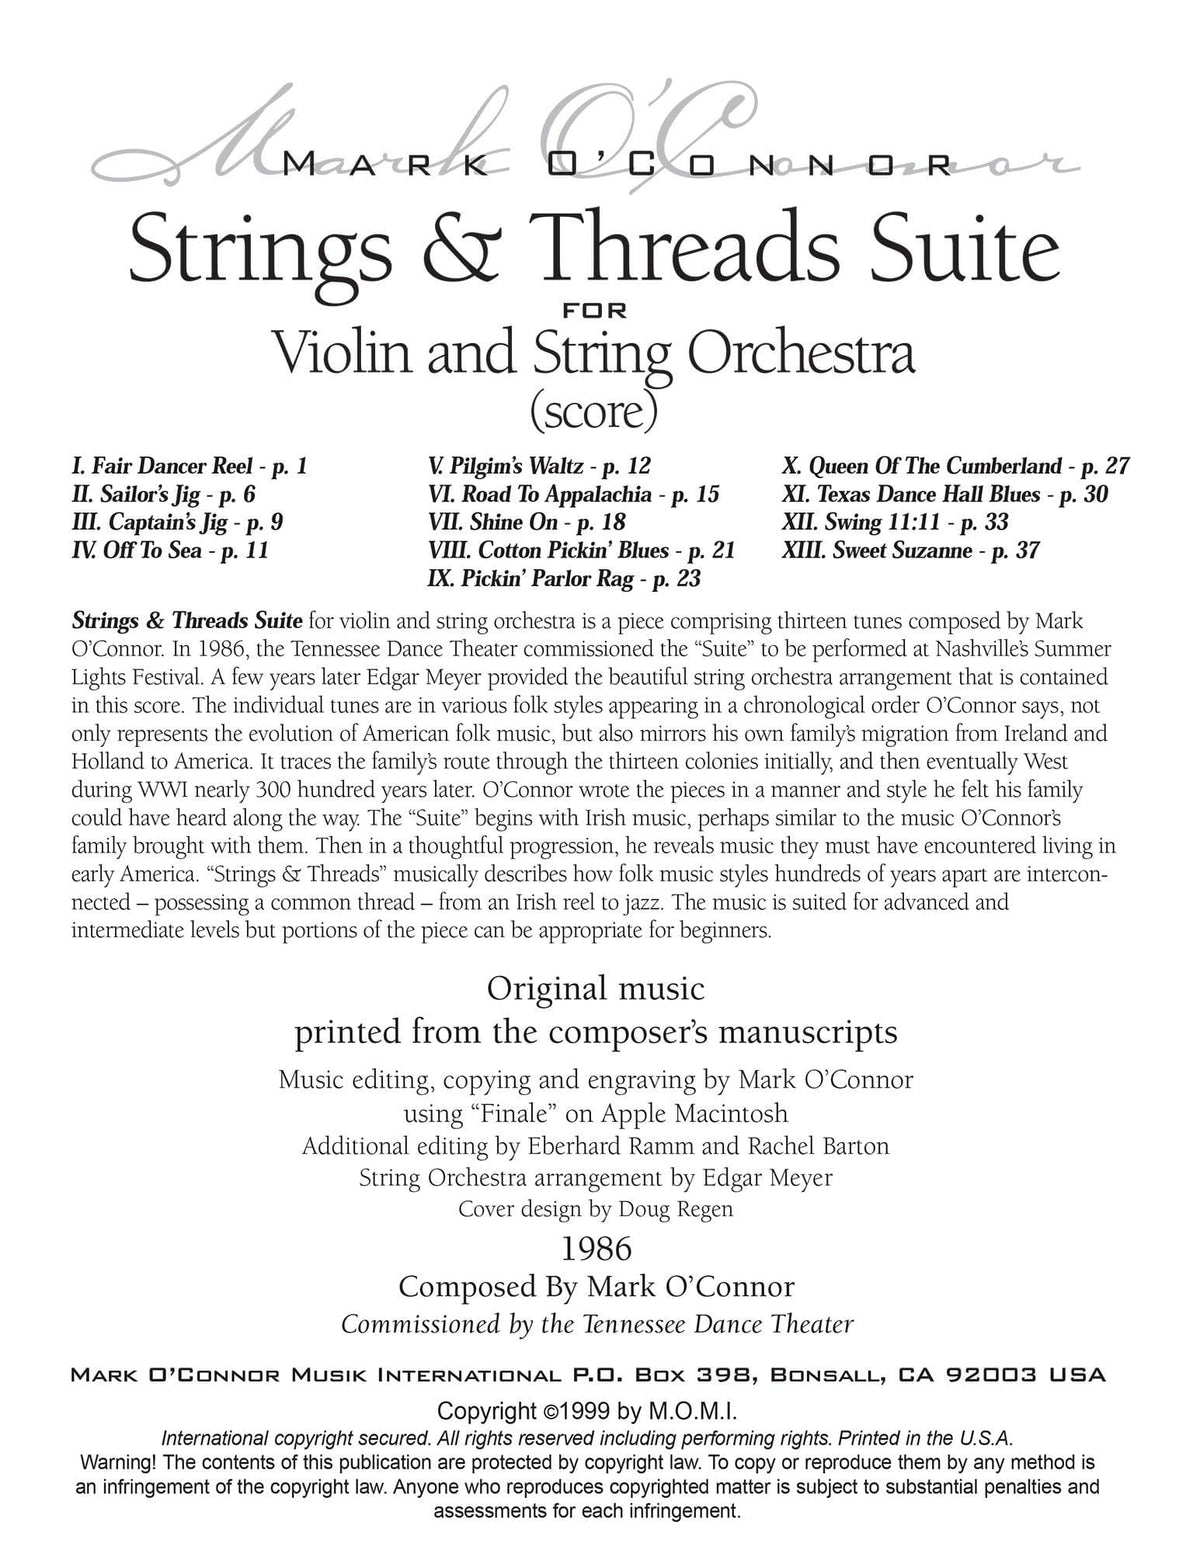 O'Connor, Mark - Strings & Threads Suite for Violin and String Orchestra - Score - Digital Download